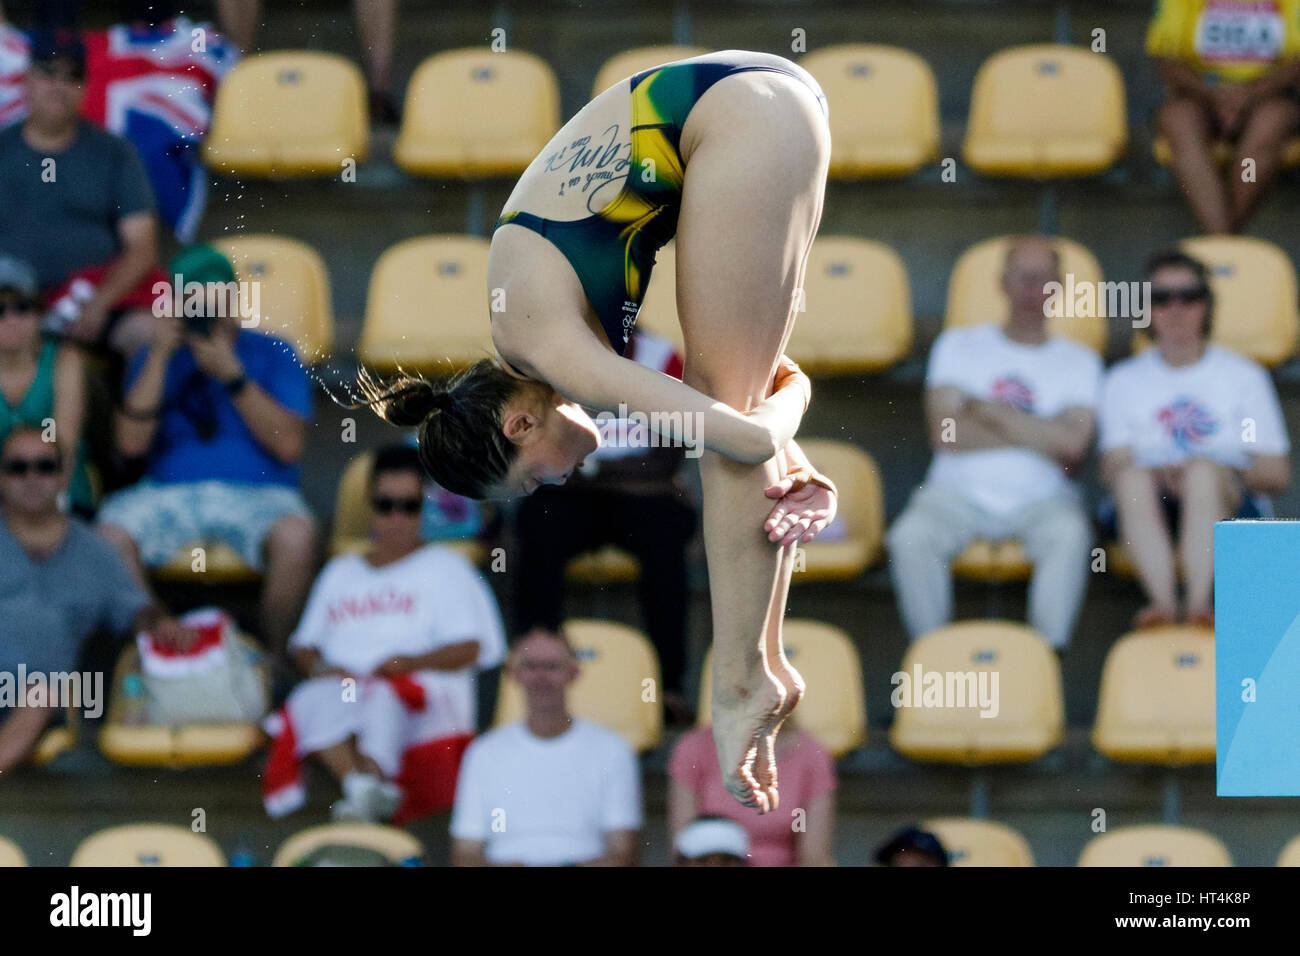 Rio de Janeiro, Brazil. 18 August 2016 Melissa Wu (AUS) competes in the Women Diving Platform 10m preliminary at the 2016 Olympic Summer Games. ©Paul Stock Photo